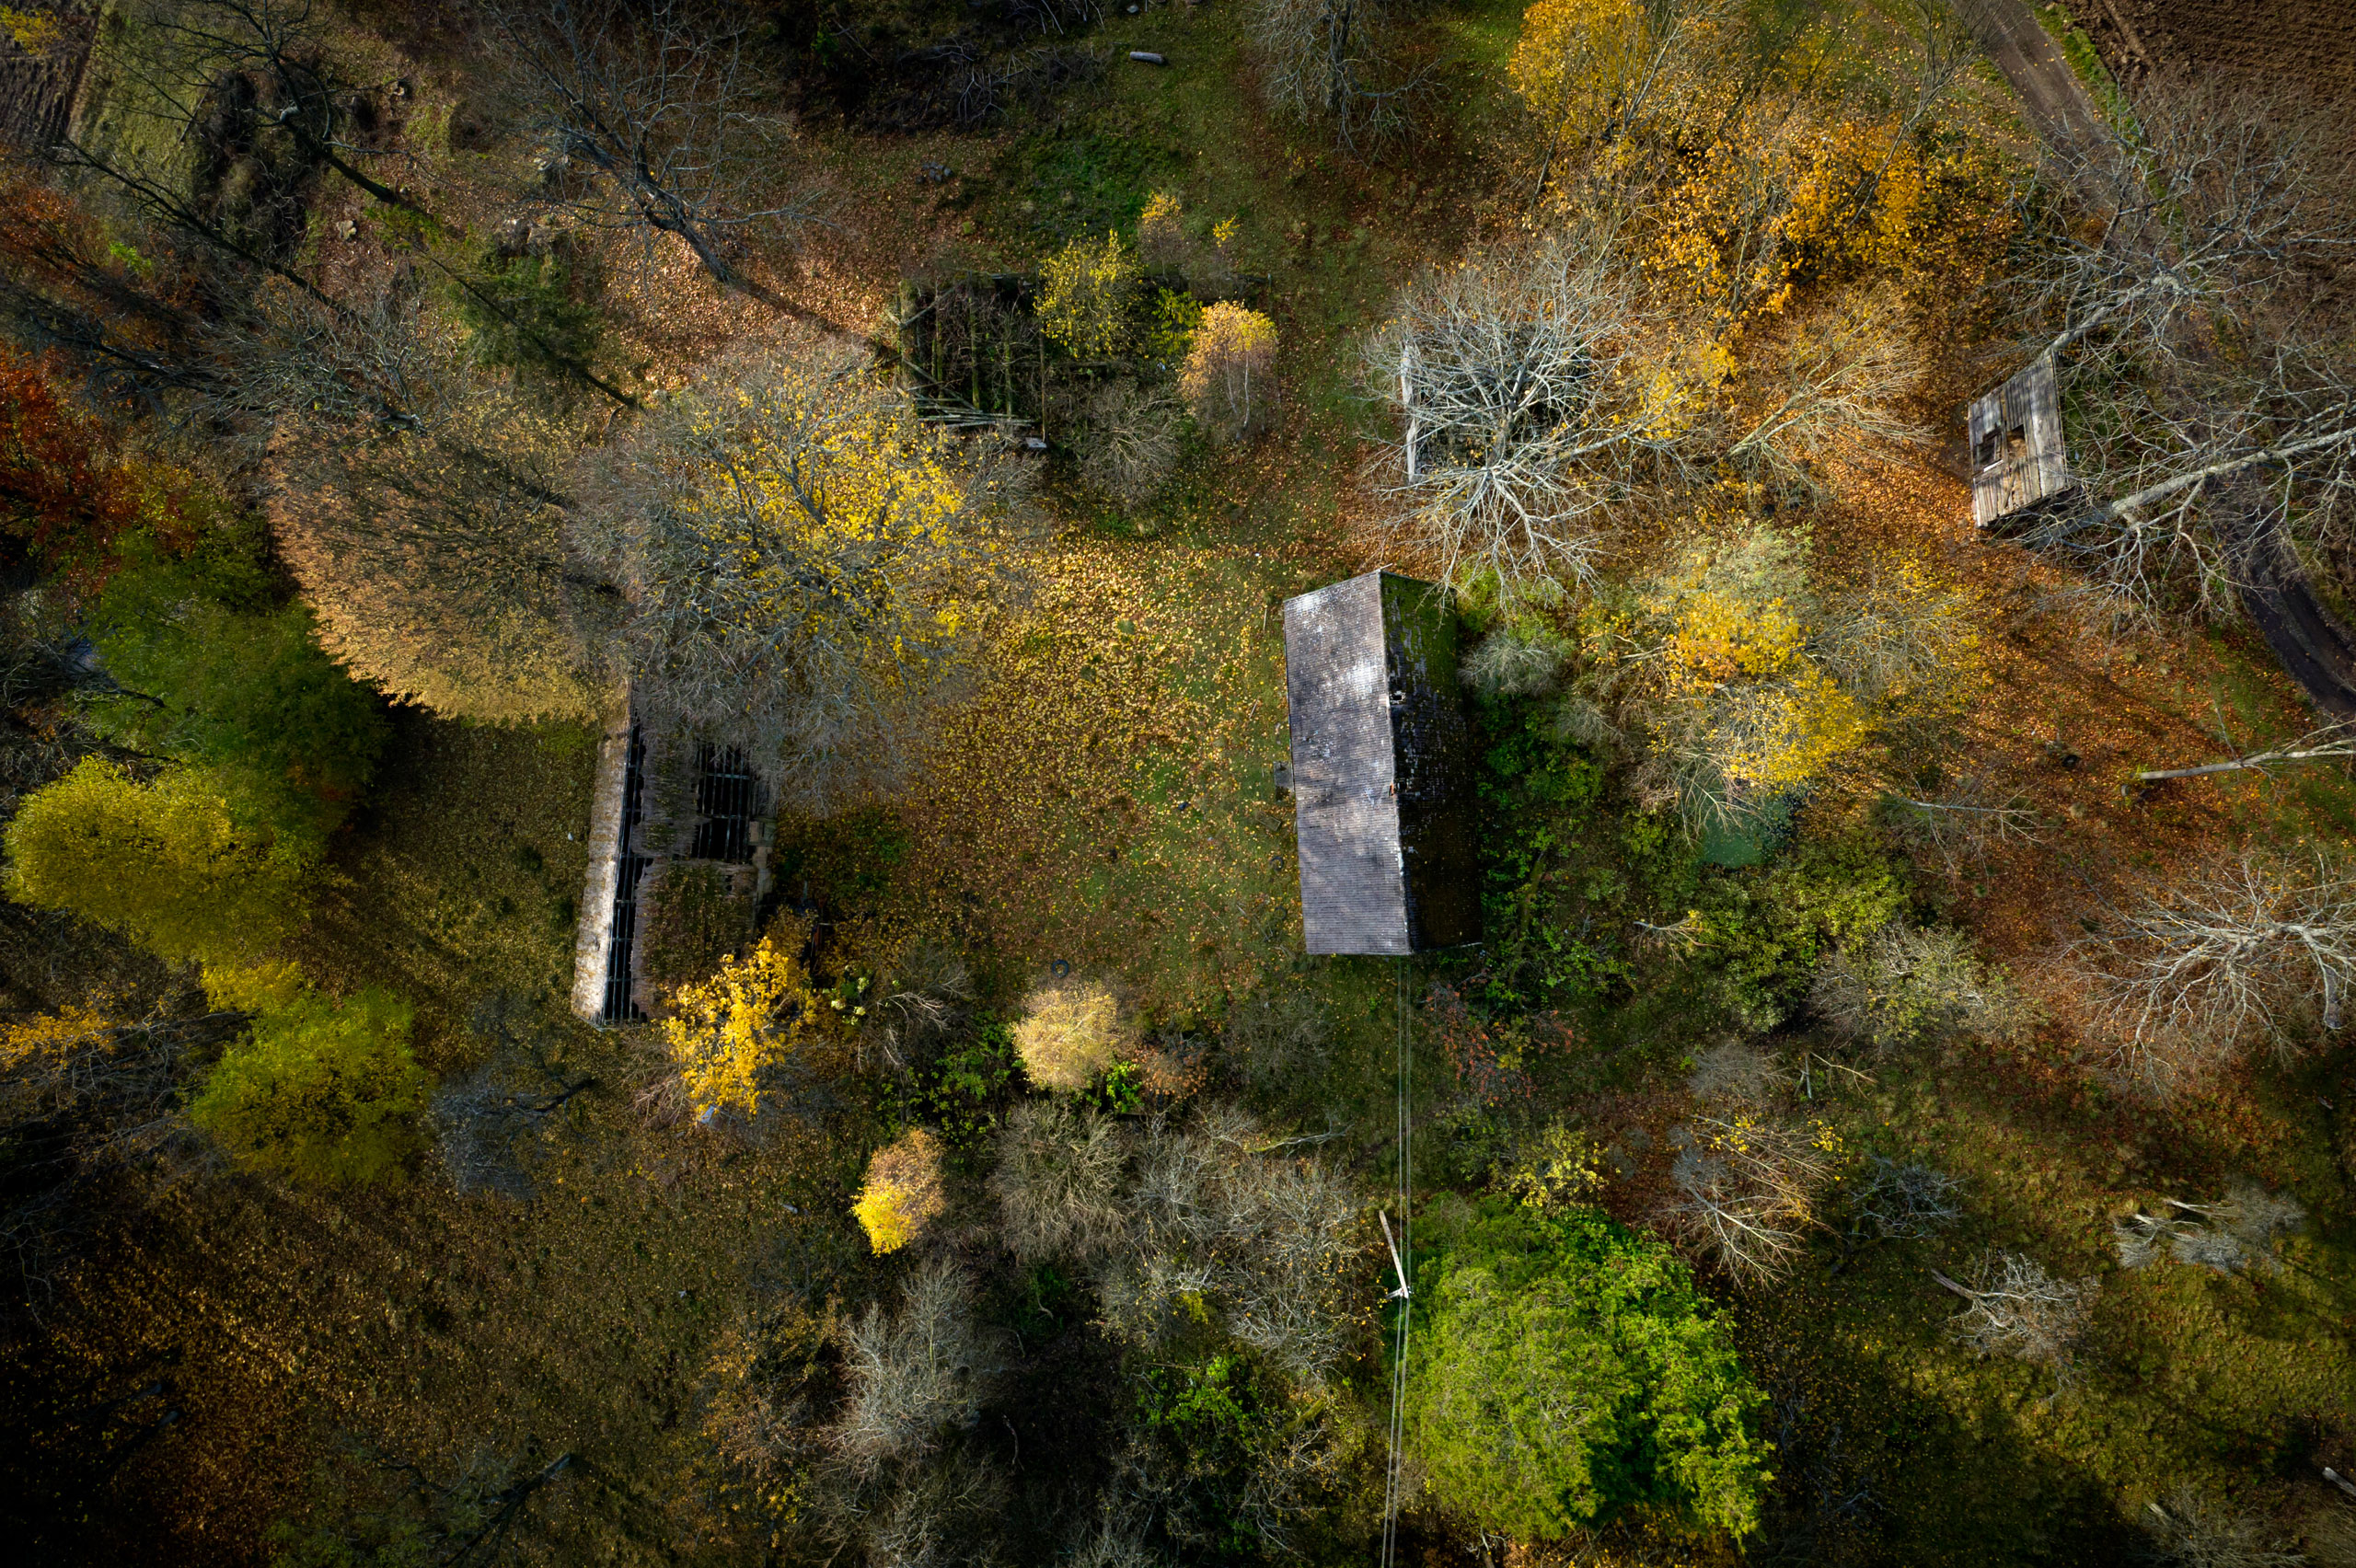 A view of a house in a forest with trees changing colour in autumn in Kashubia.